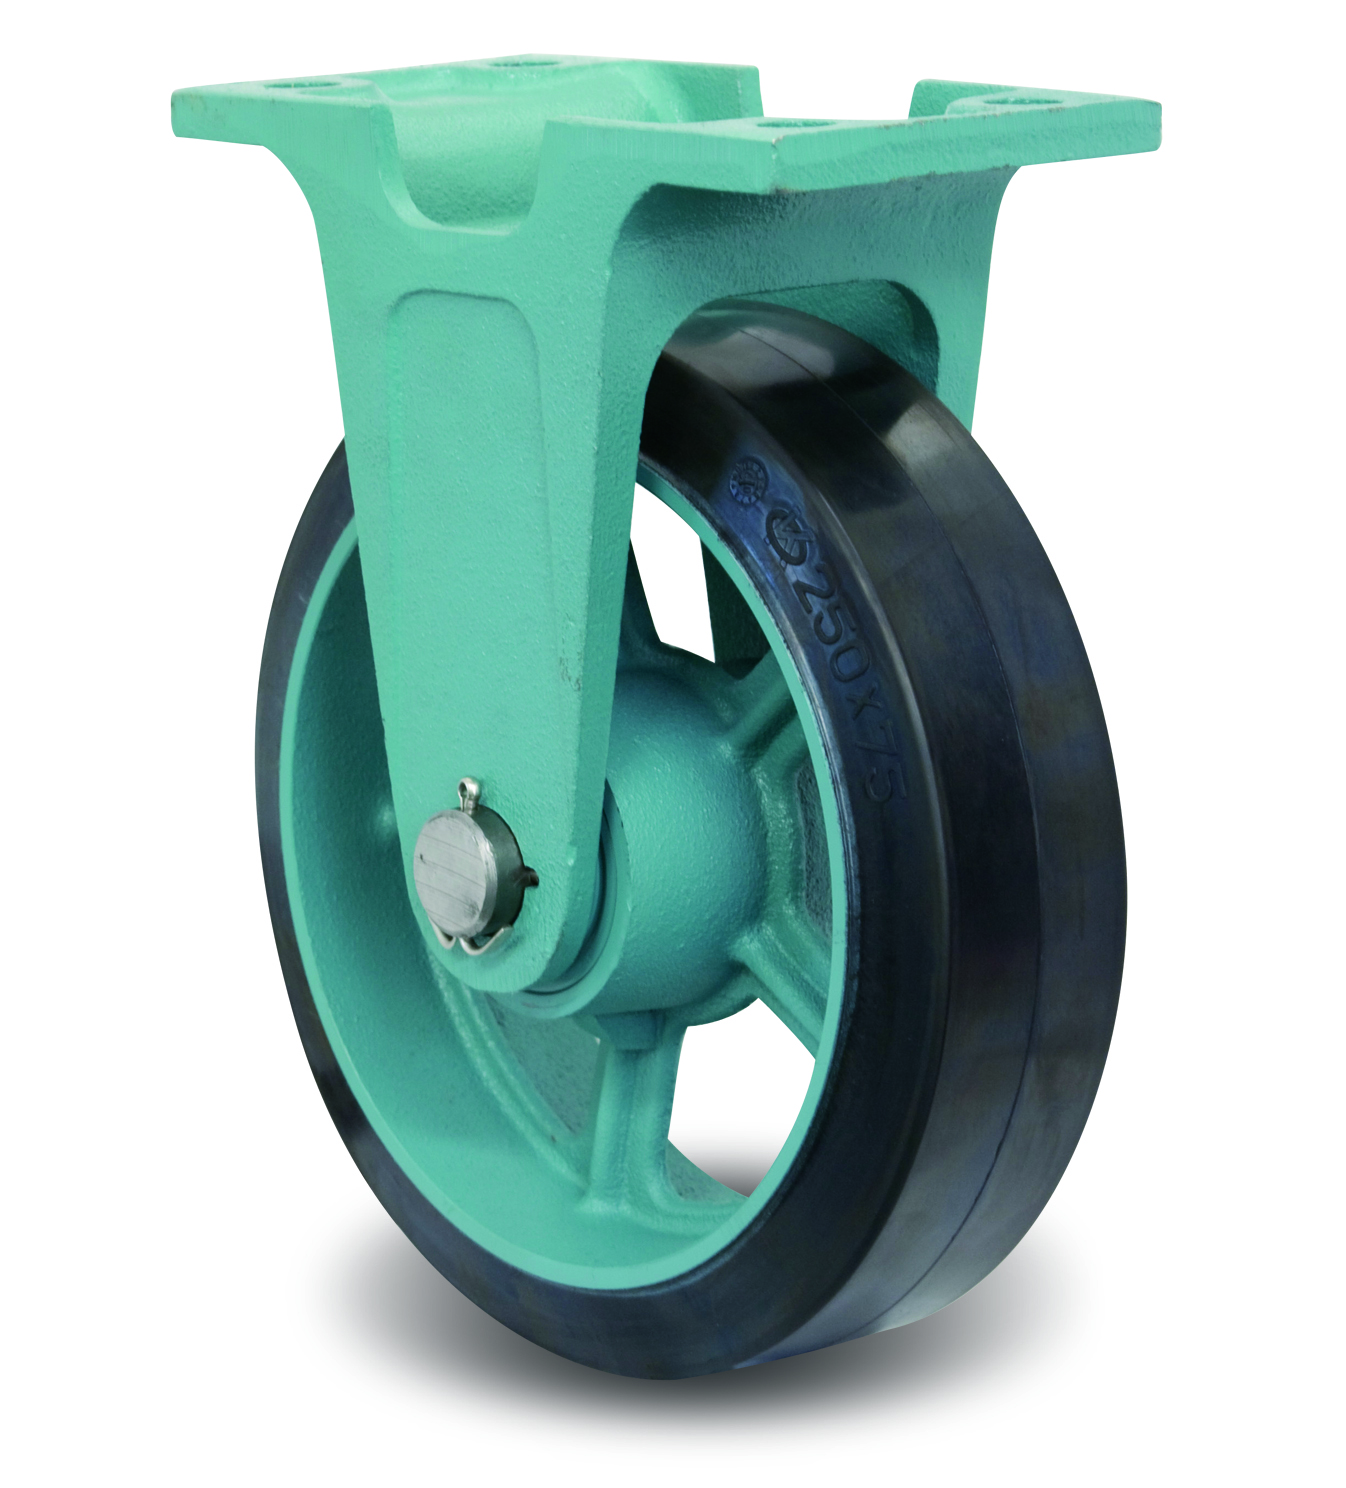 Casters - Wide Type Ductile Steel Fixed Plate Rubber, MG-W, E/MG-W Series. EMG-W250X90